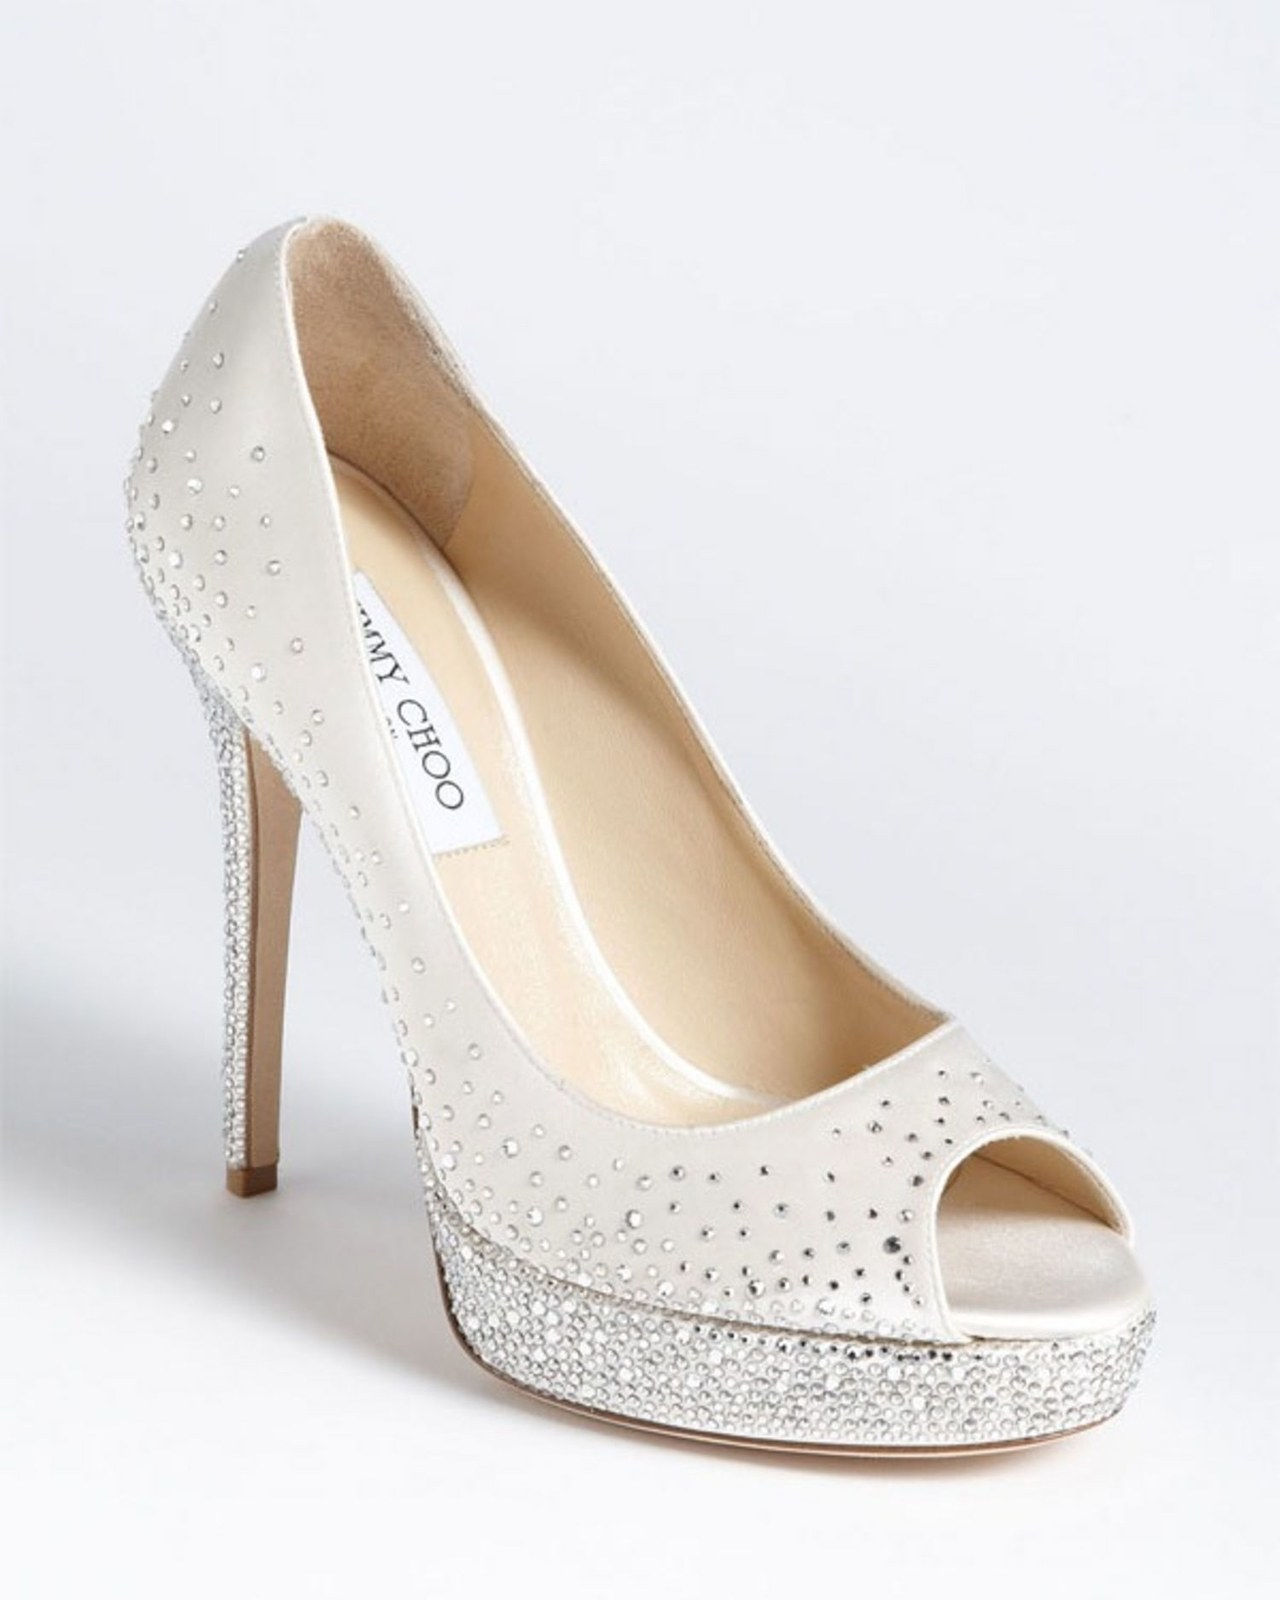 1 jimmy choo wedding shoes for brides 0304